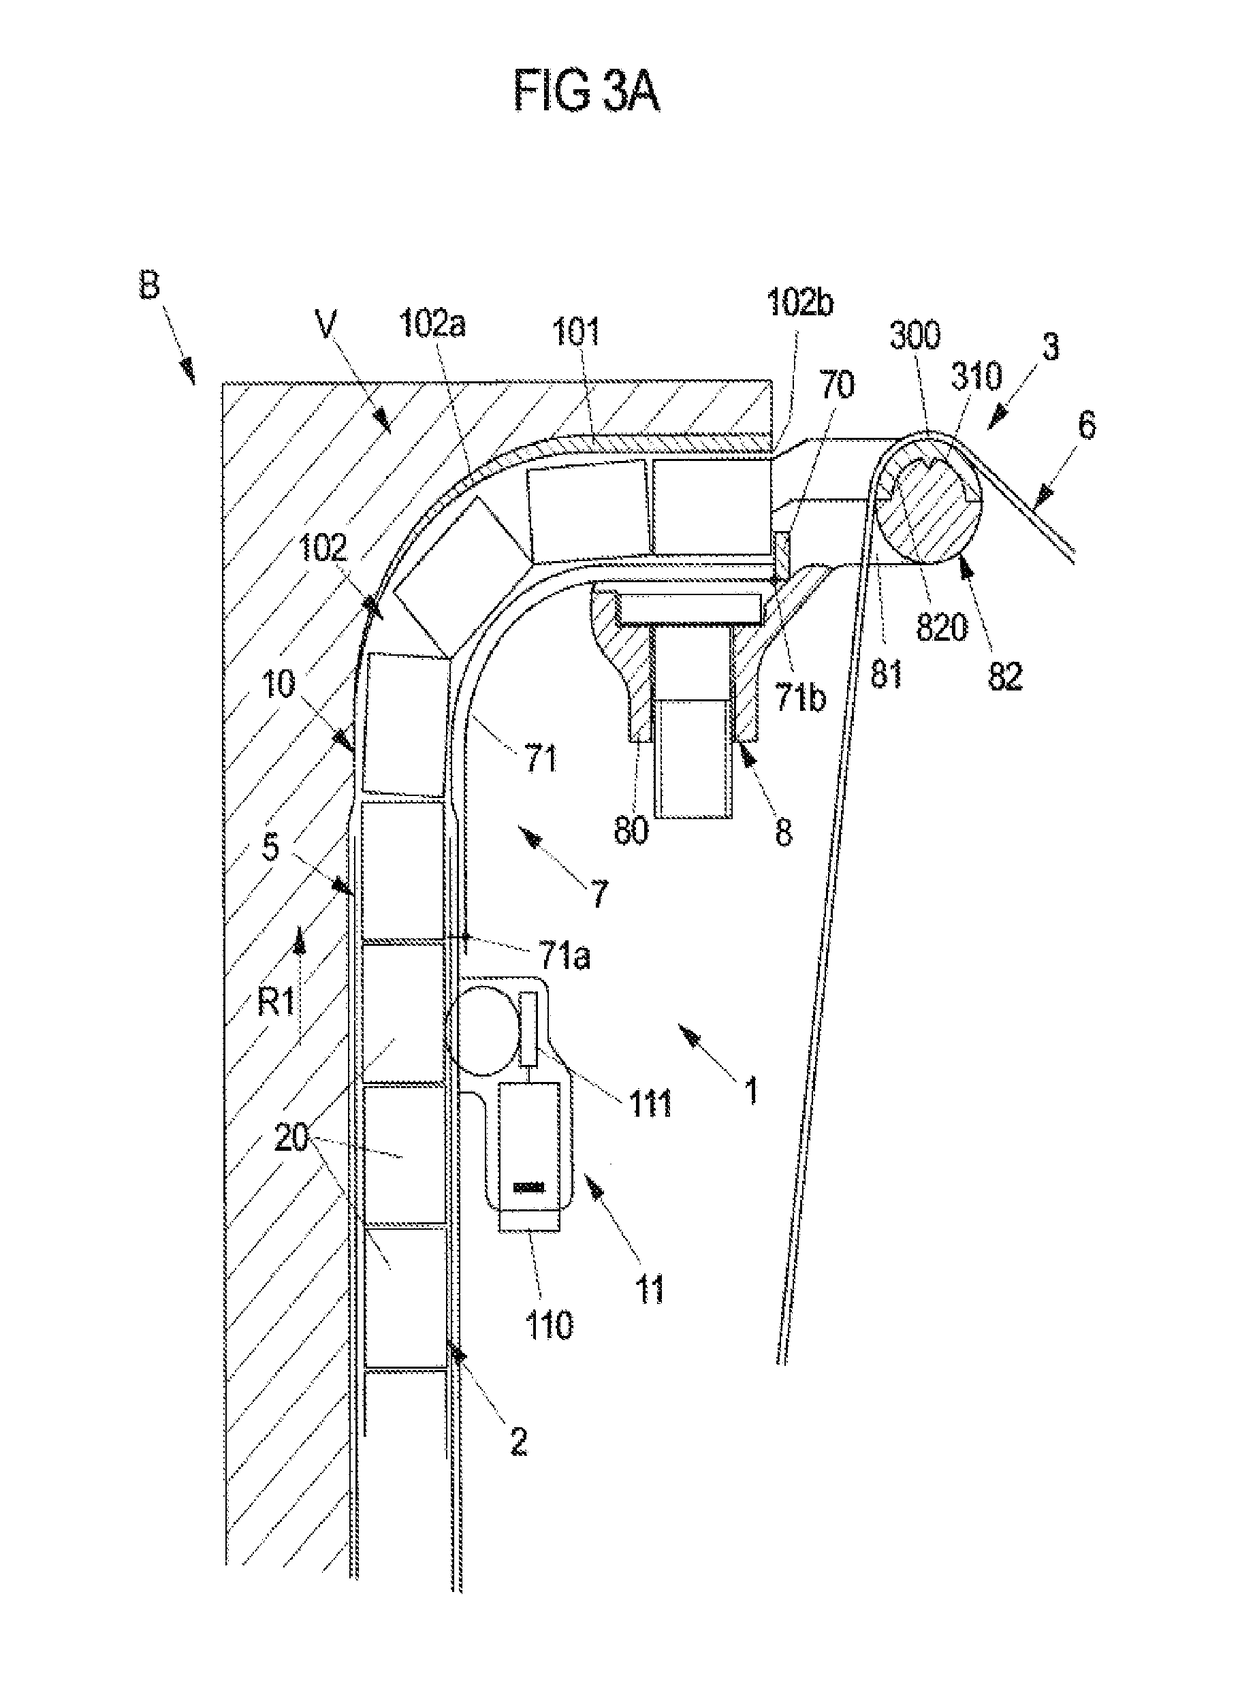 Adjusting device for a safety belt with an extendable belt guiding element